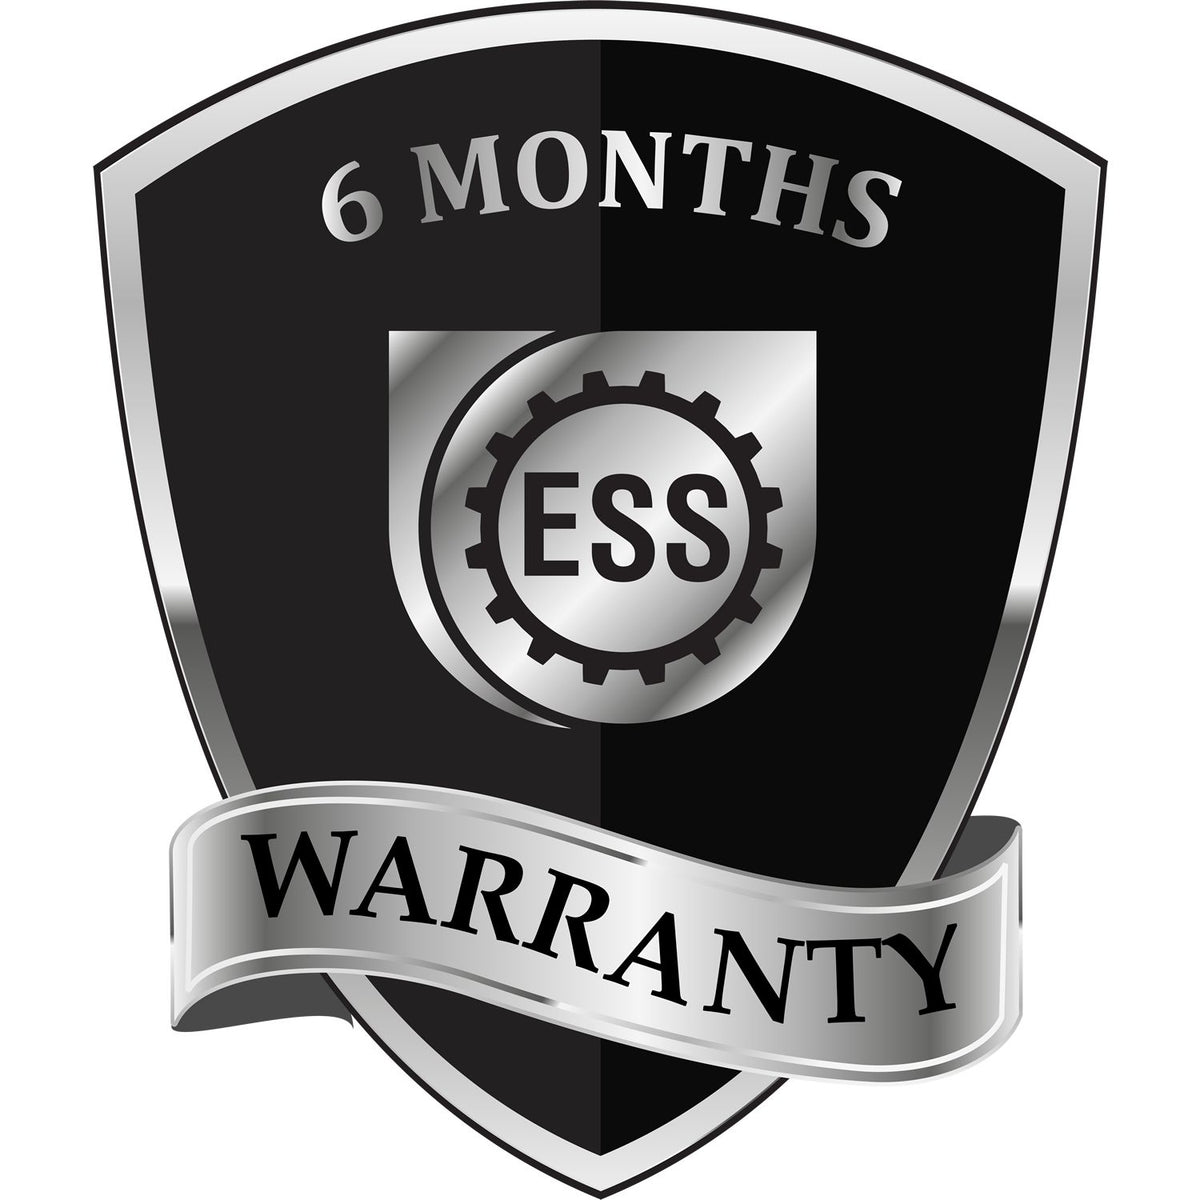 A black and silver badge or emblem showing warranty information for the New York Professional Geologist Seal Stamp